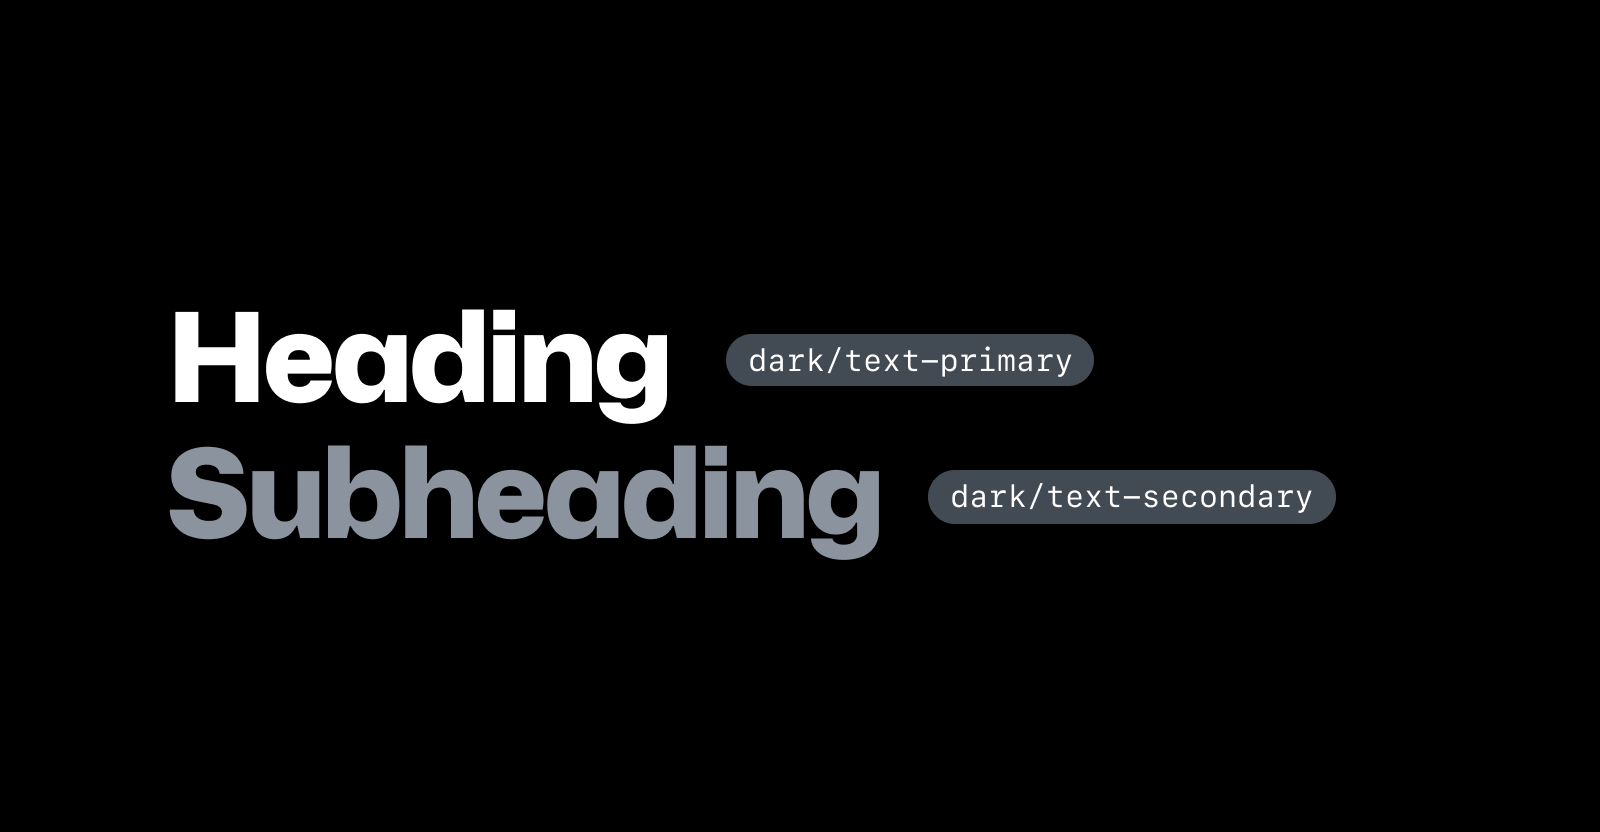 The words "heading" above the word "subheading" in white and blaack respectively, on black background. "Heading" is labeled dark/text-primary while "Subheading" is labeled dark/text-secondary